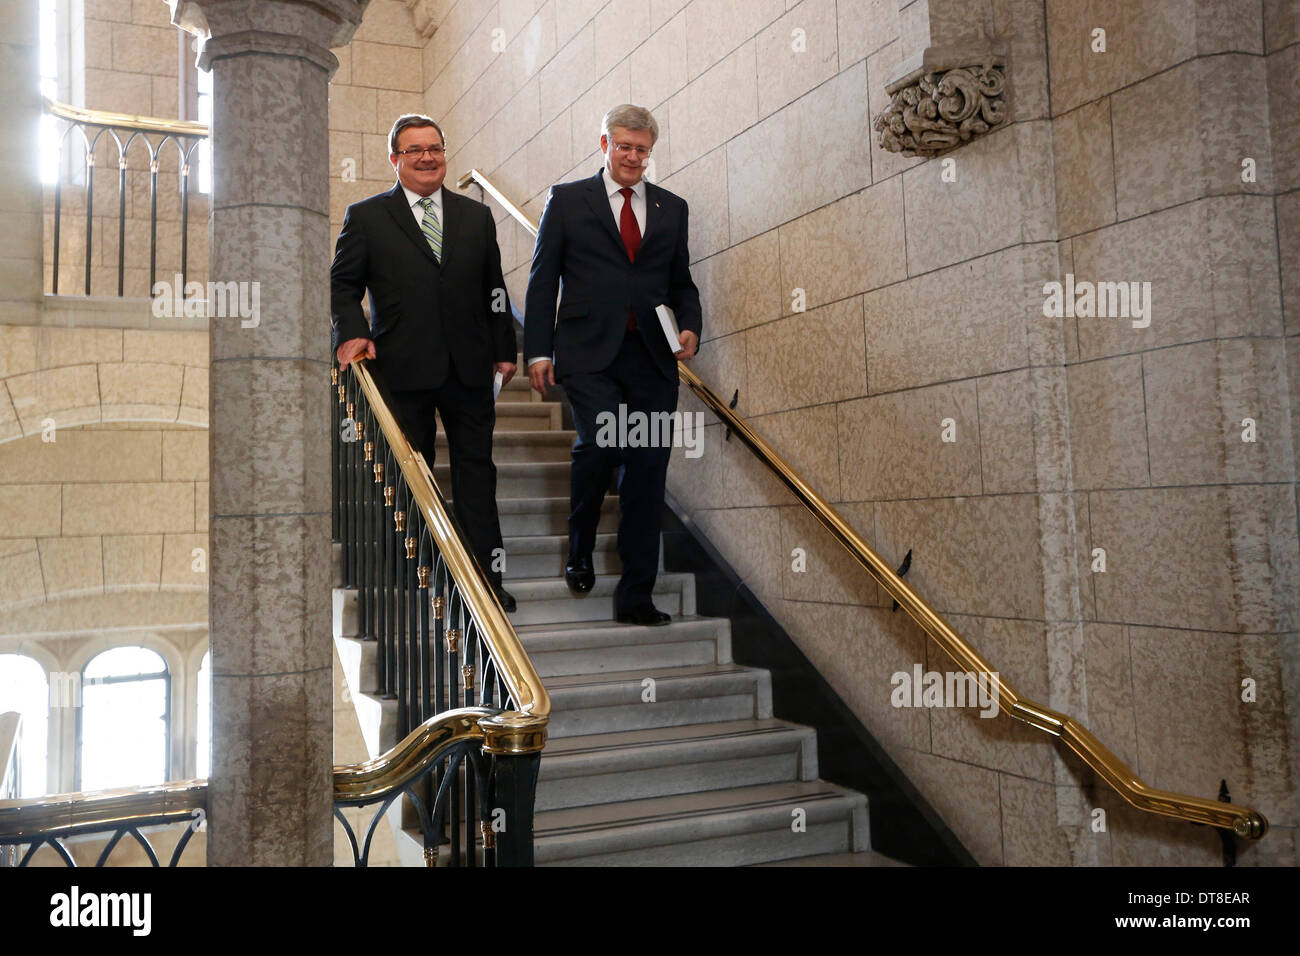 Ottawa, Canada. 11th Feb, 2014. Canada's Prime Minister Stephen Harper (R) and Finance Minister Jim Flaherty arrive to announce the new federal budget at Parliament Hill in Ottawa, Canada, Feb. 11, 2014. Jim Flaherty on Tuesday unveiled a federal budget projecting a surplus in 2015. © David Kawai/Xinhua/Alamy Live News Stock Photo